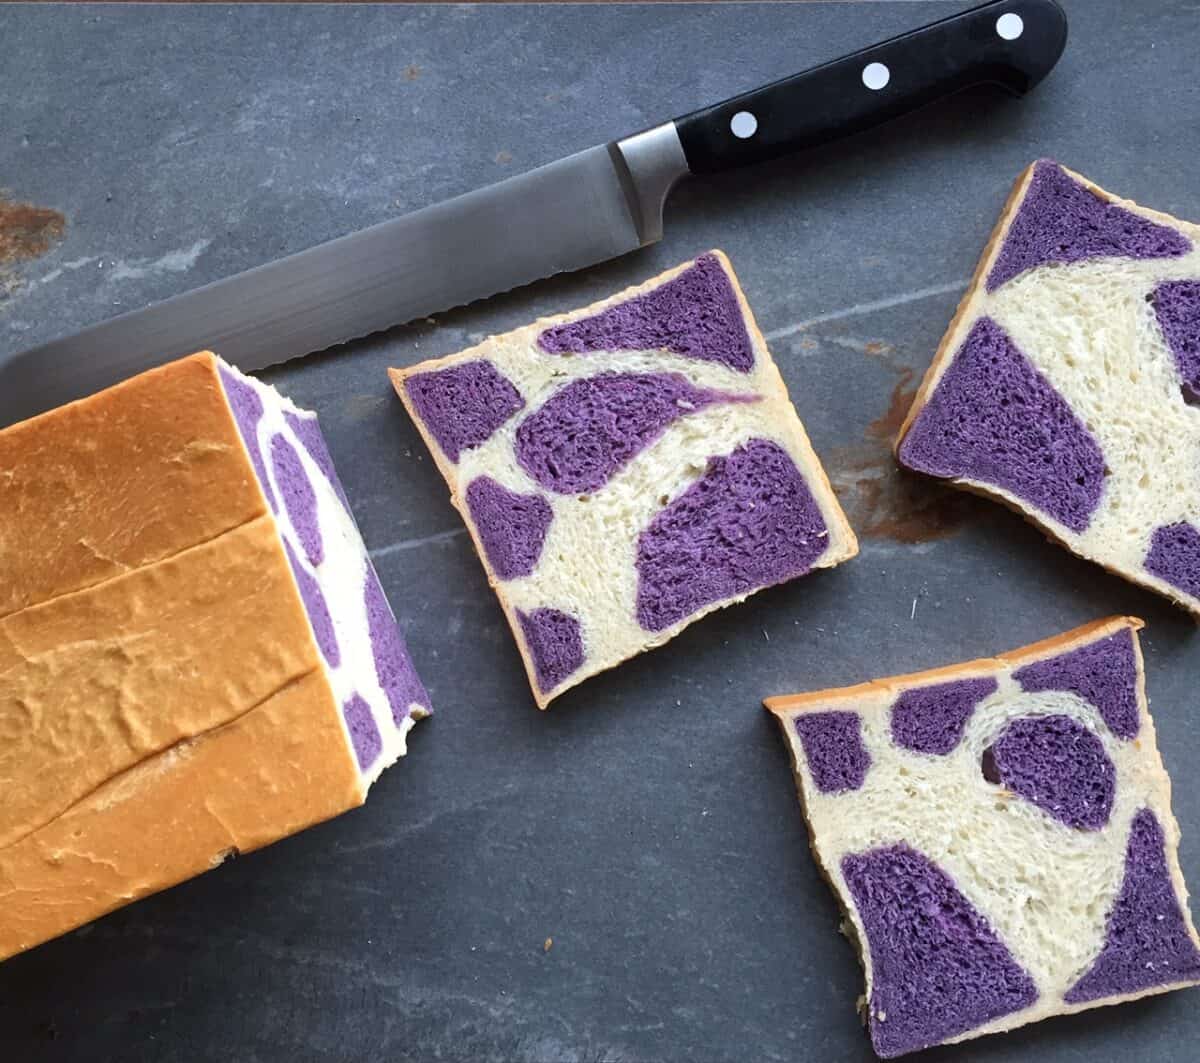 slices of bread in a purple cow pattern.